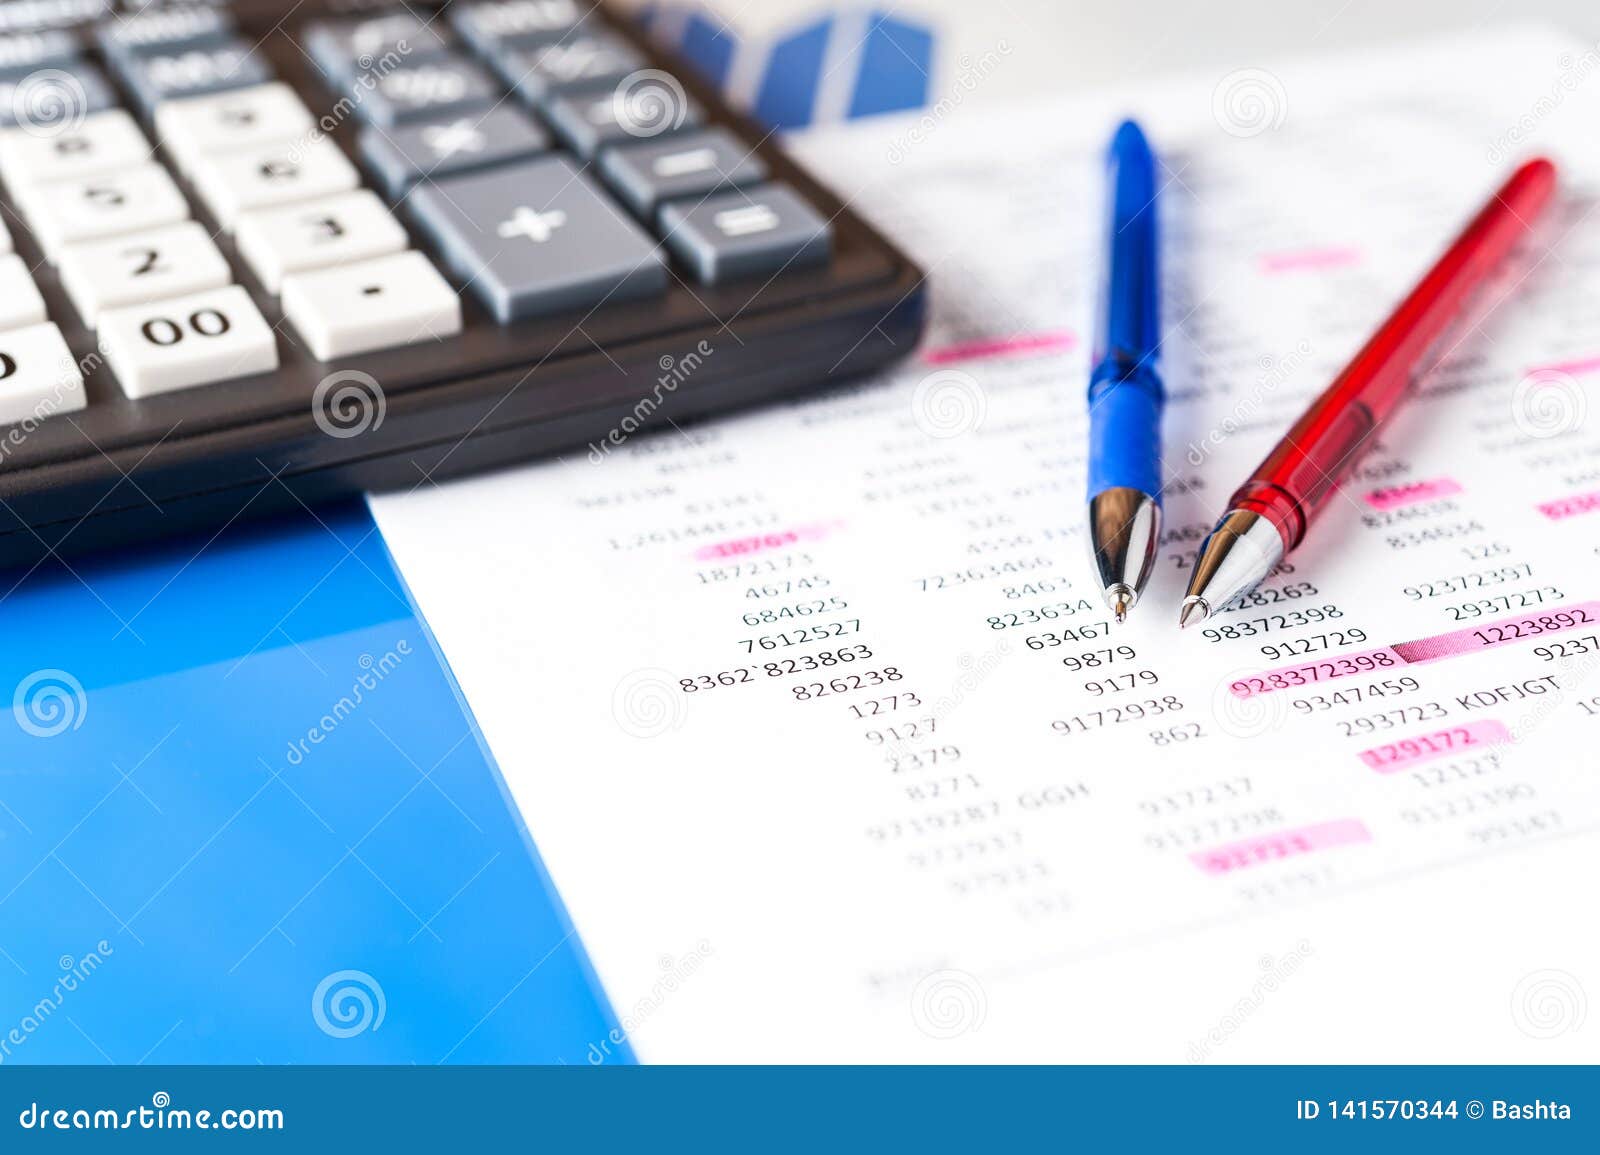 business and financial background with data, pen and calculator. bookkeeping background.